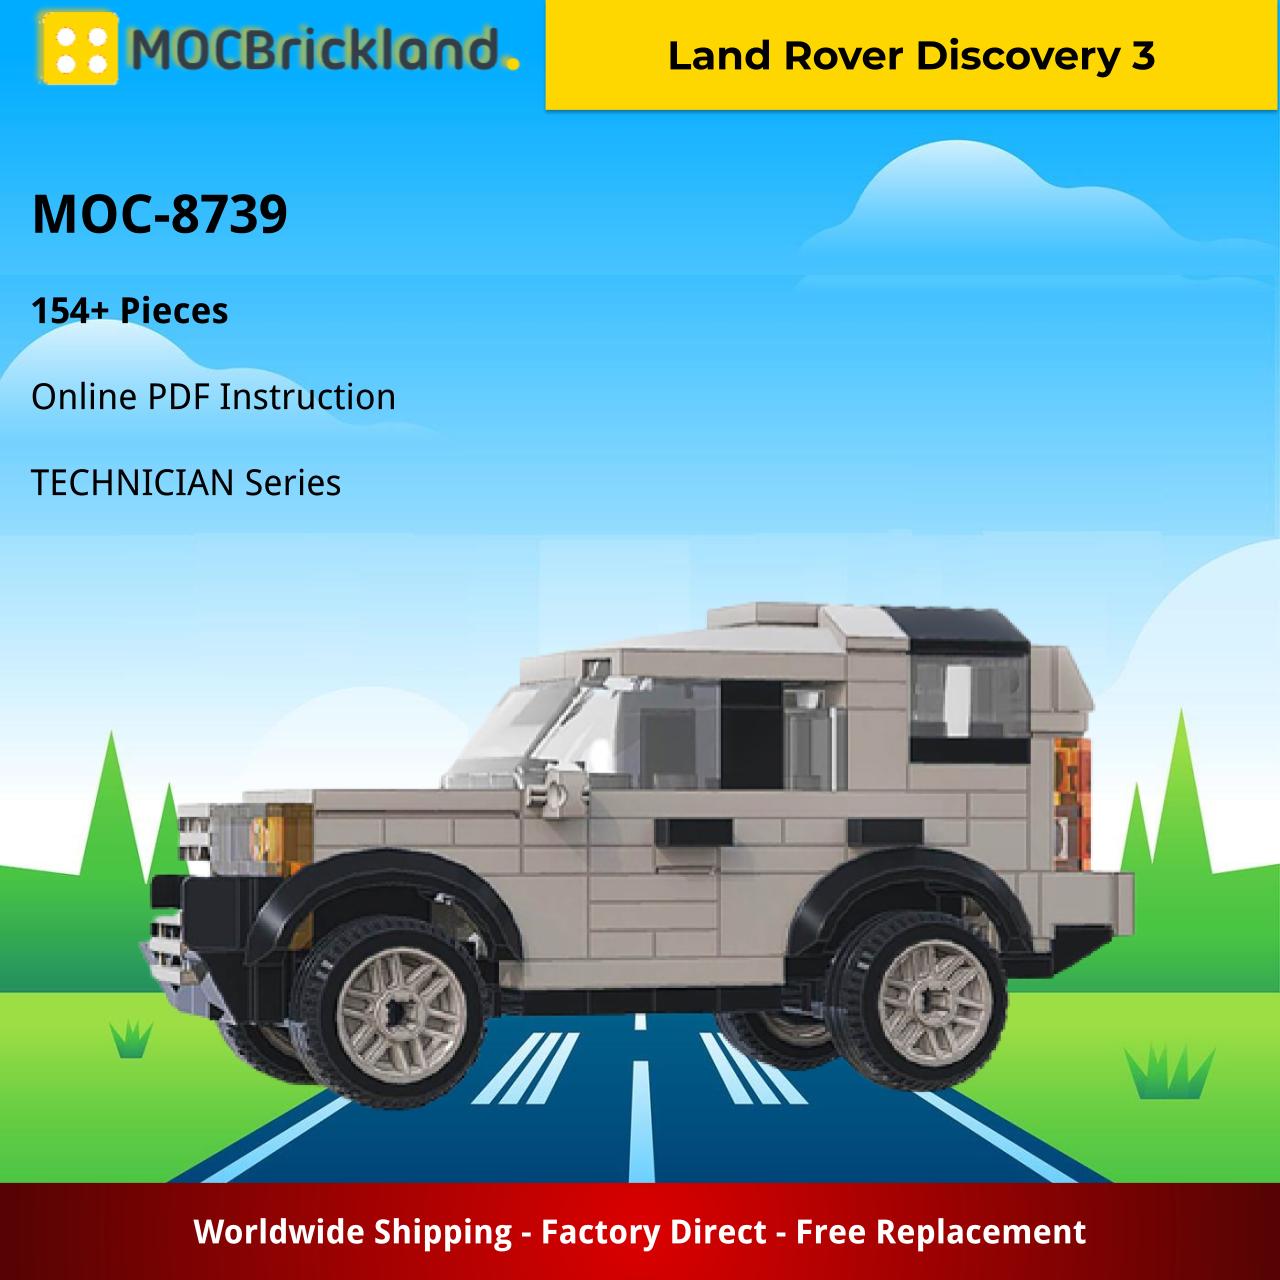 technician moc 8739 land rover discovery 3 mocbrickland 1150